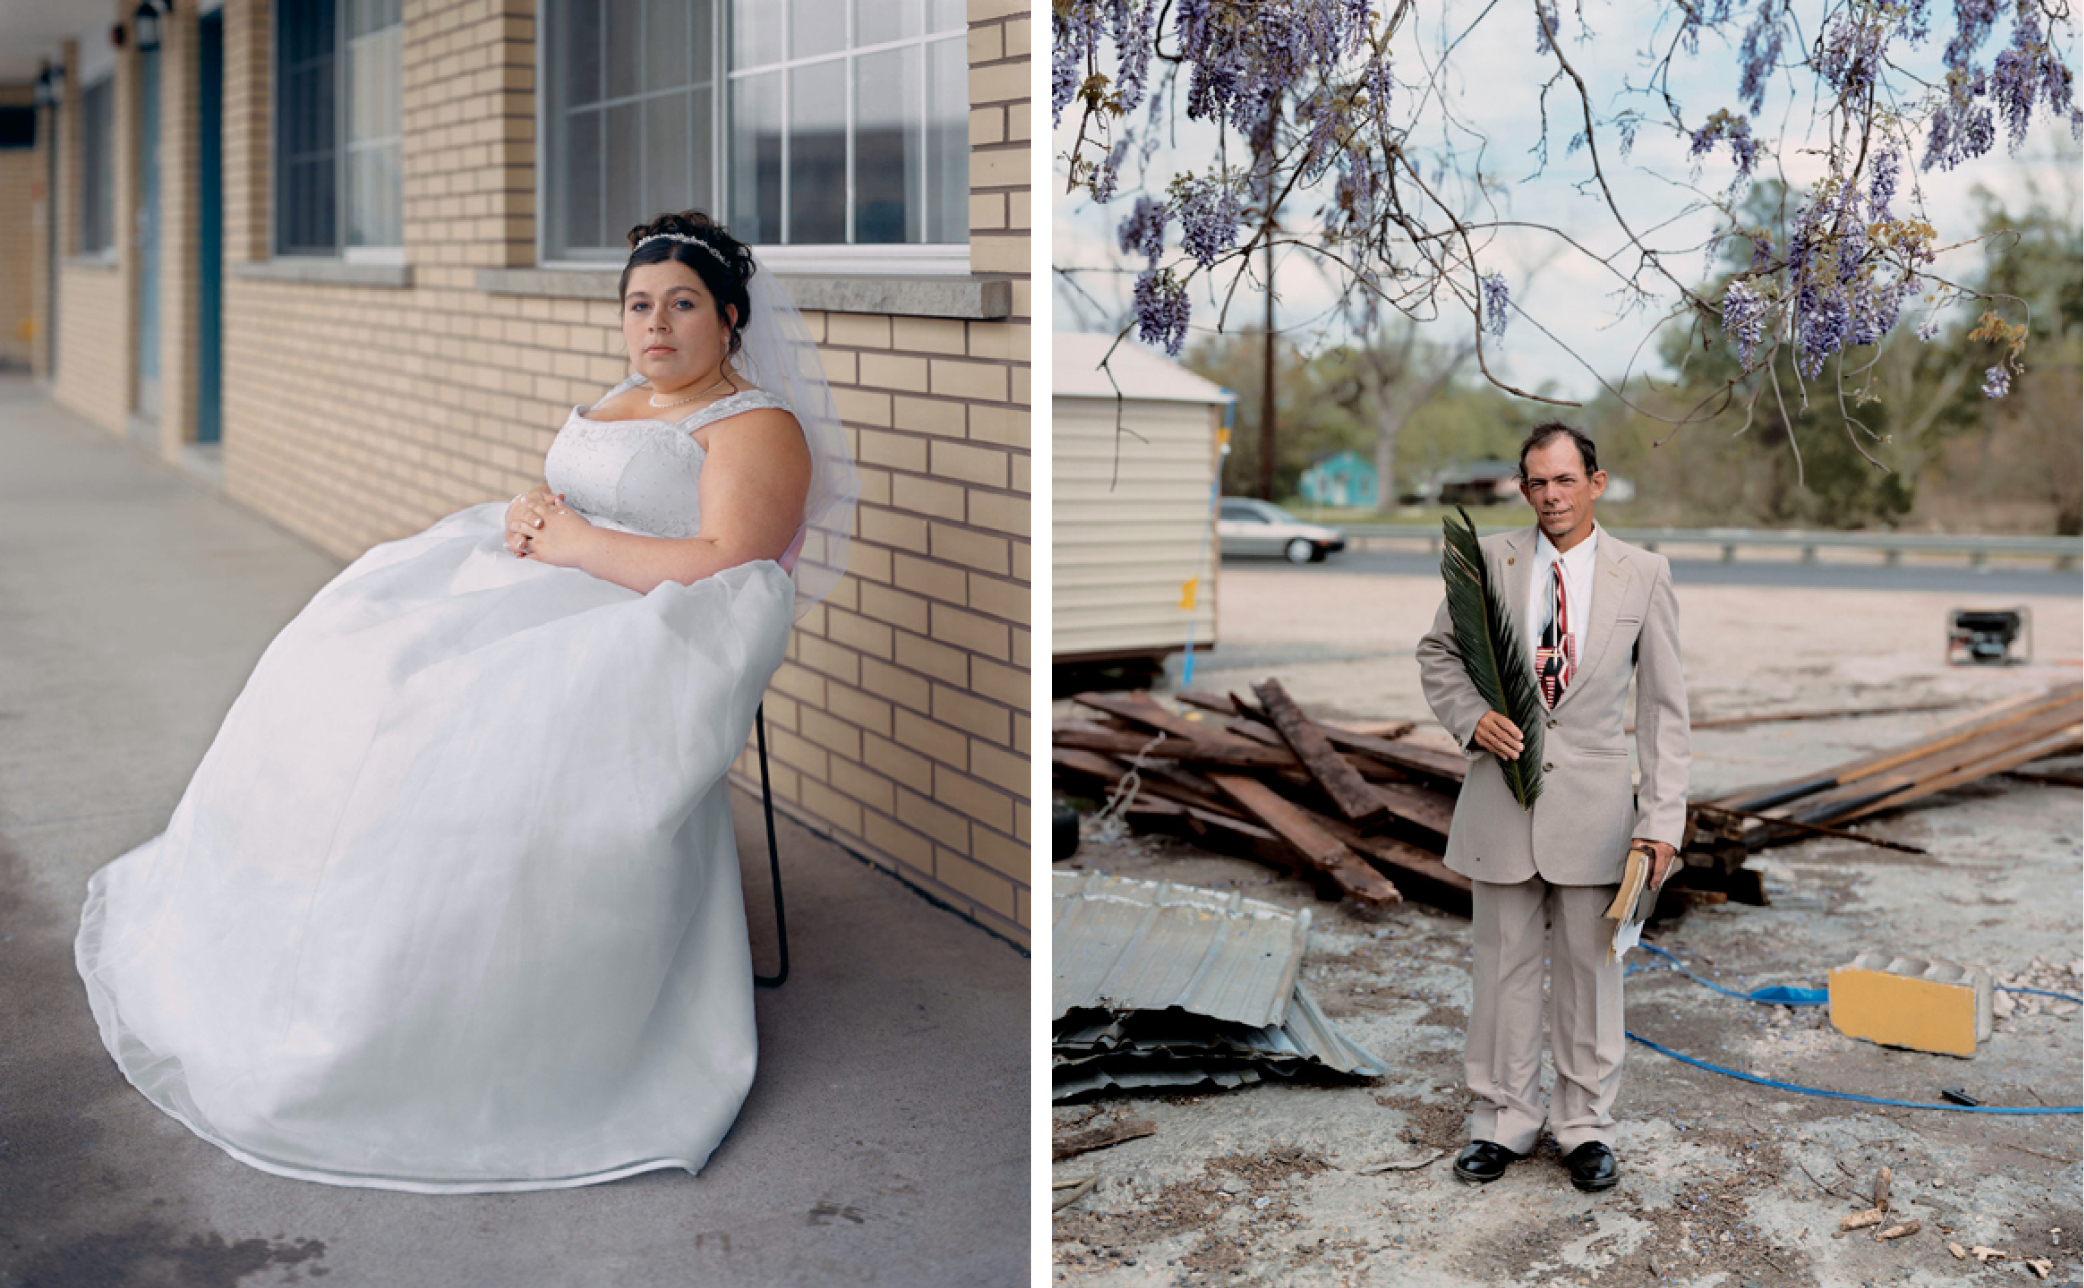 Left: Melissa, 2005, from Niagara © Alec Soth.  Right: Patrick, Palm Sunday, Baton Rouge, Louisiana, 2002, from Sleeping by the Mississippi © Alec Soth.